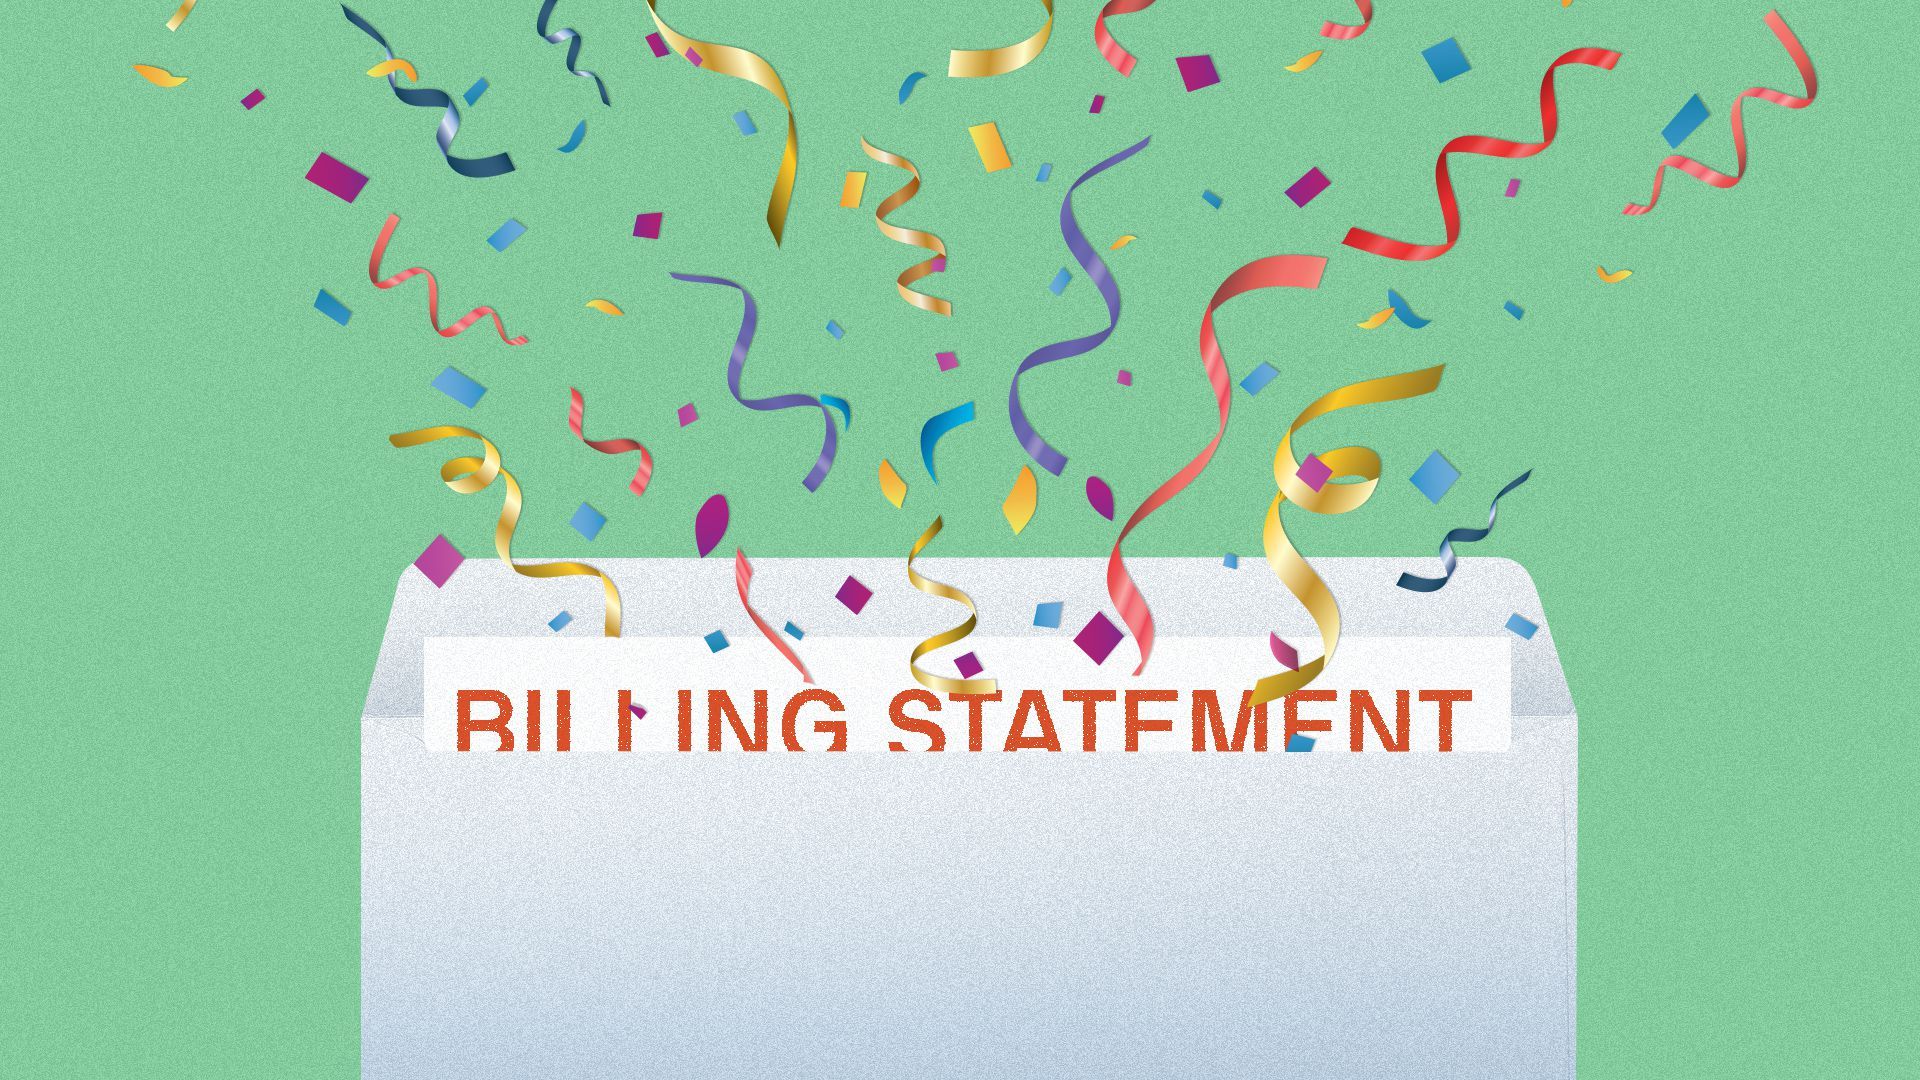 Illustration of an opened envelope with a billing statement inside and confetti spilling out.  